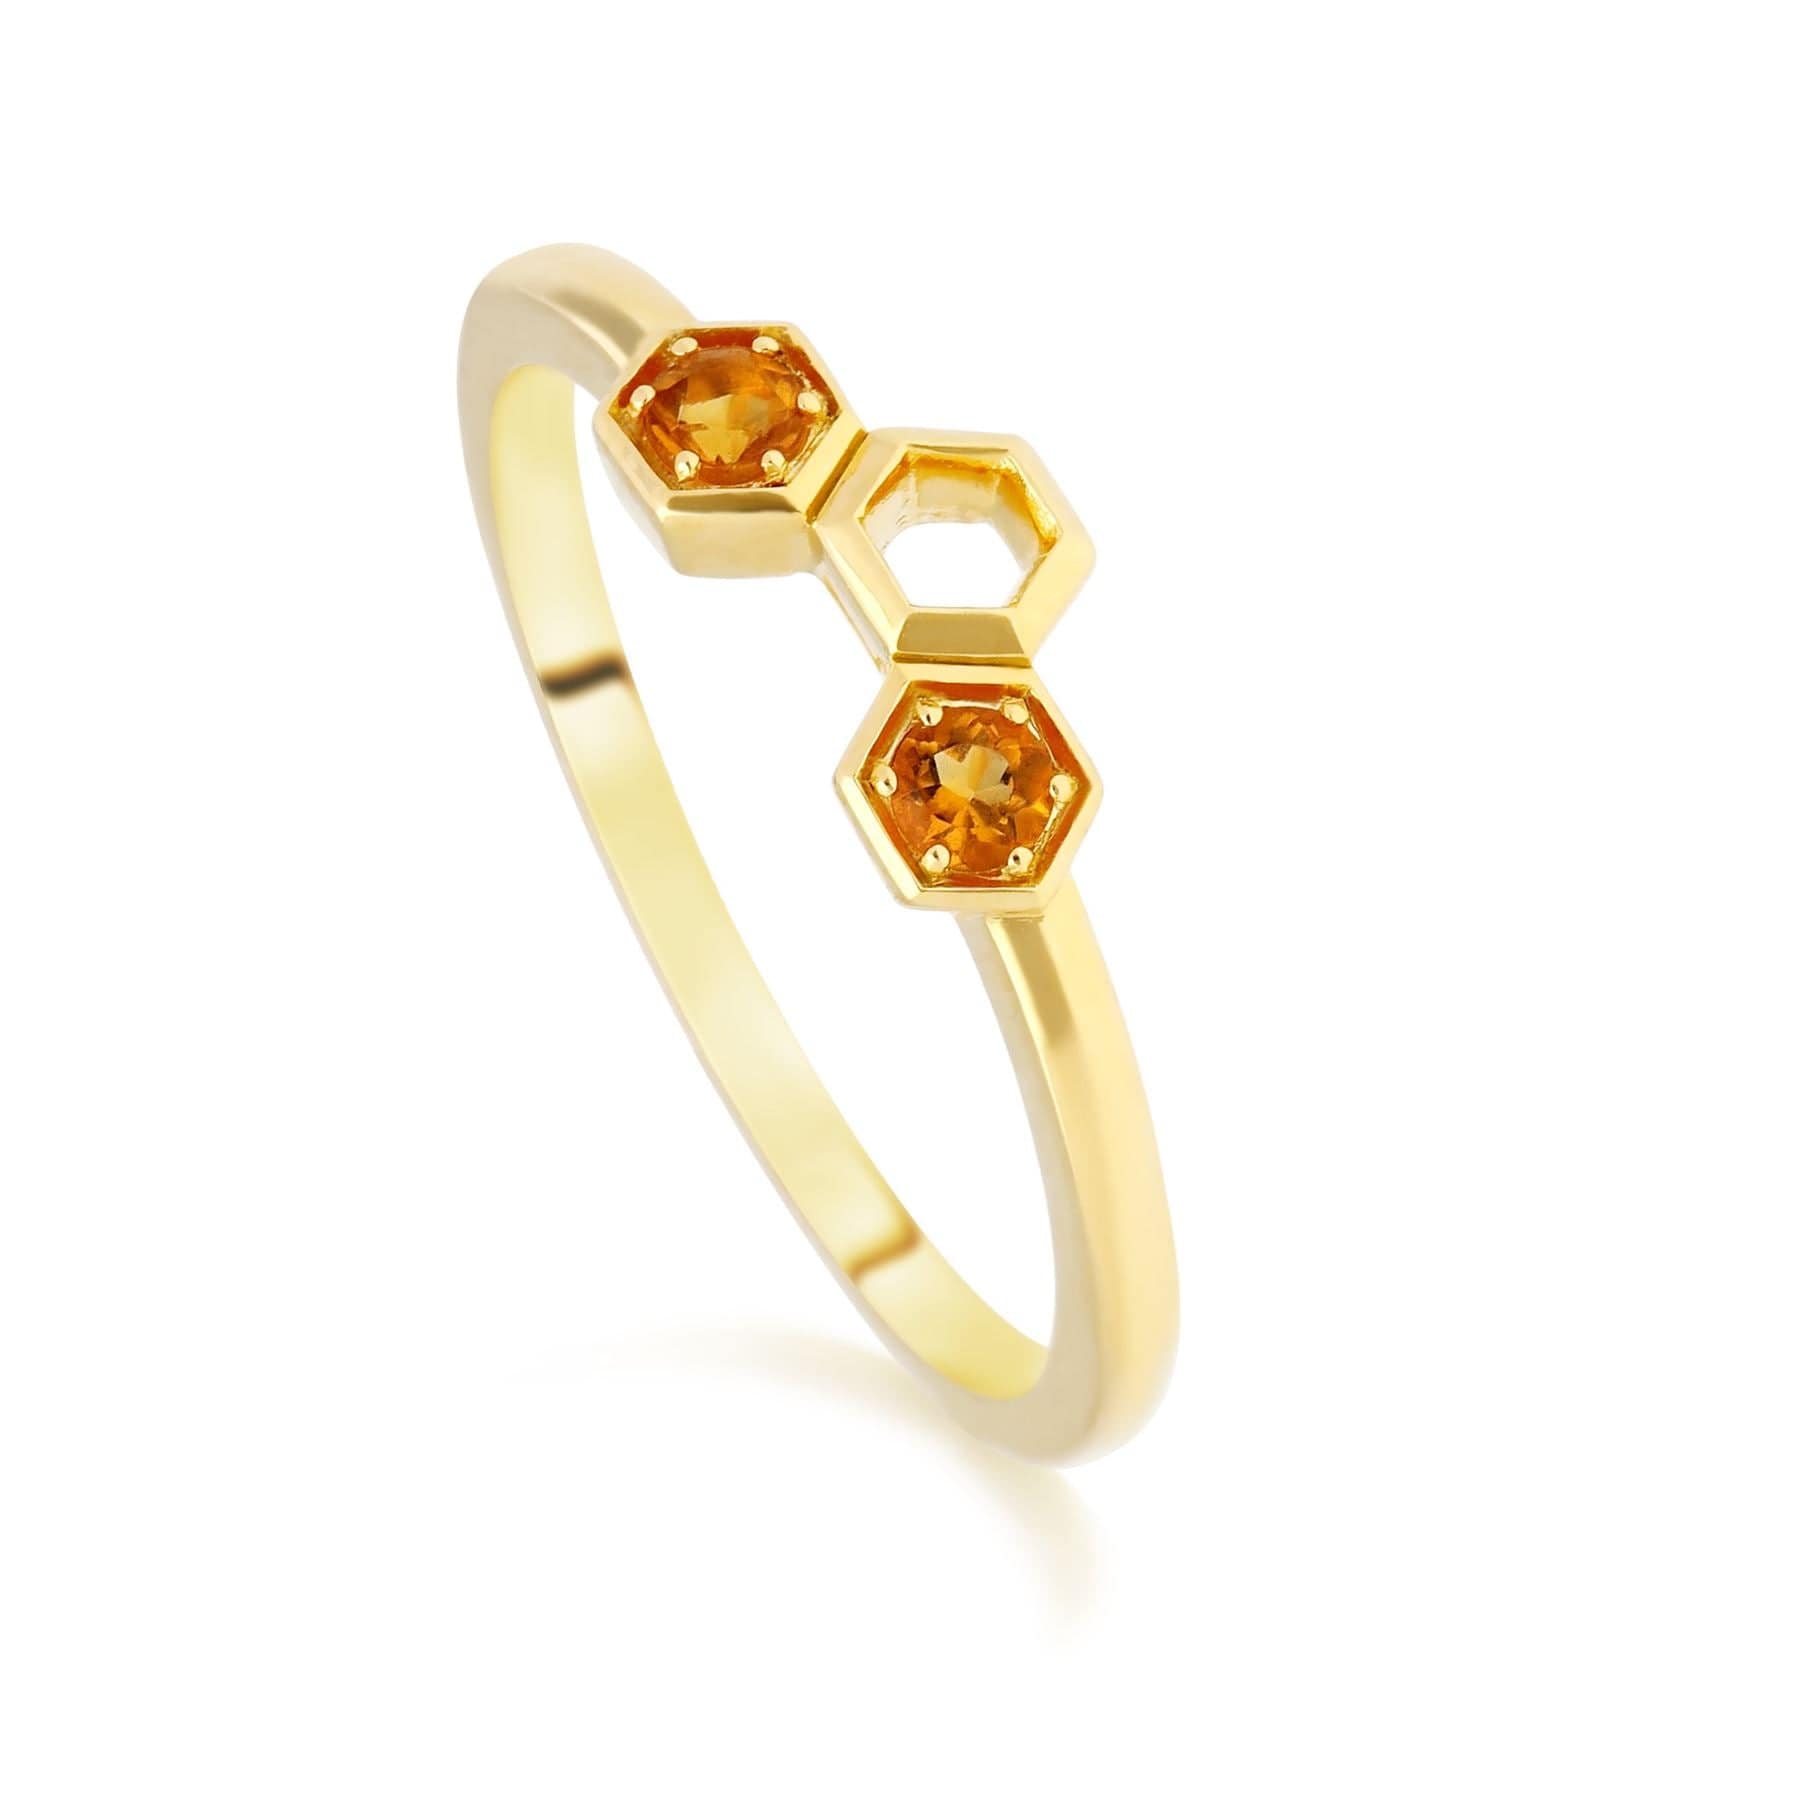 135R1838019 Honeycomb Inspired Citrine Stack Ring in 9ct Yellow Gold 1